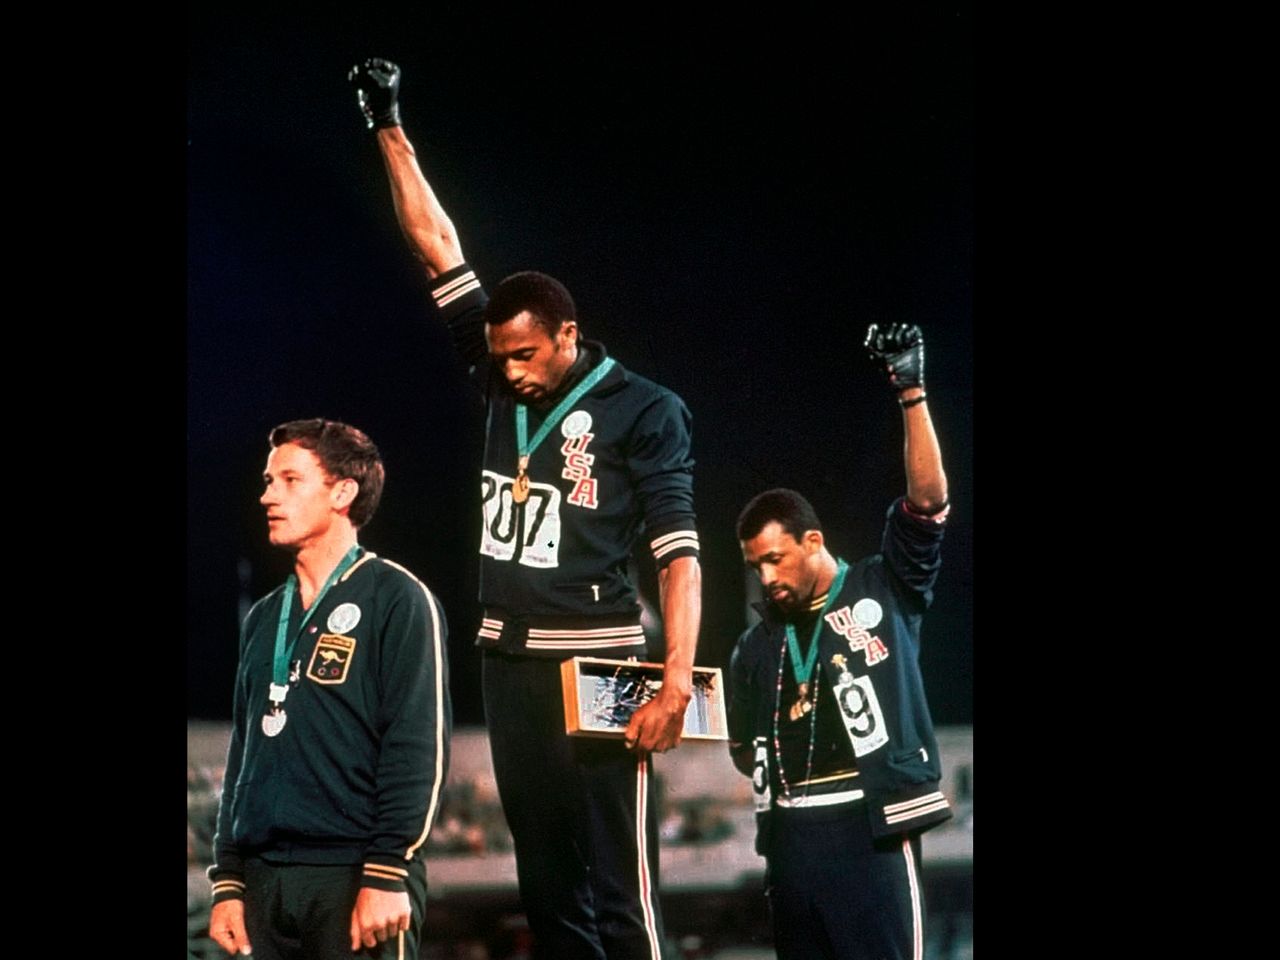 At the 1968 Mexico City Olympics, 200m winner Tommie Smith and bronze medallist John Carlos each raised an arm in a black-gloved protest